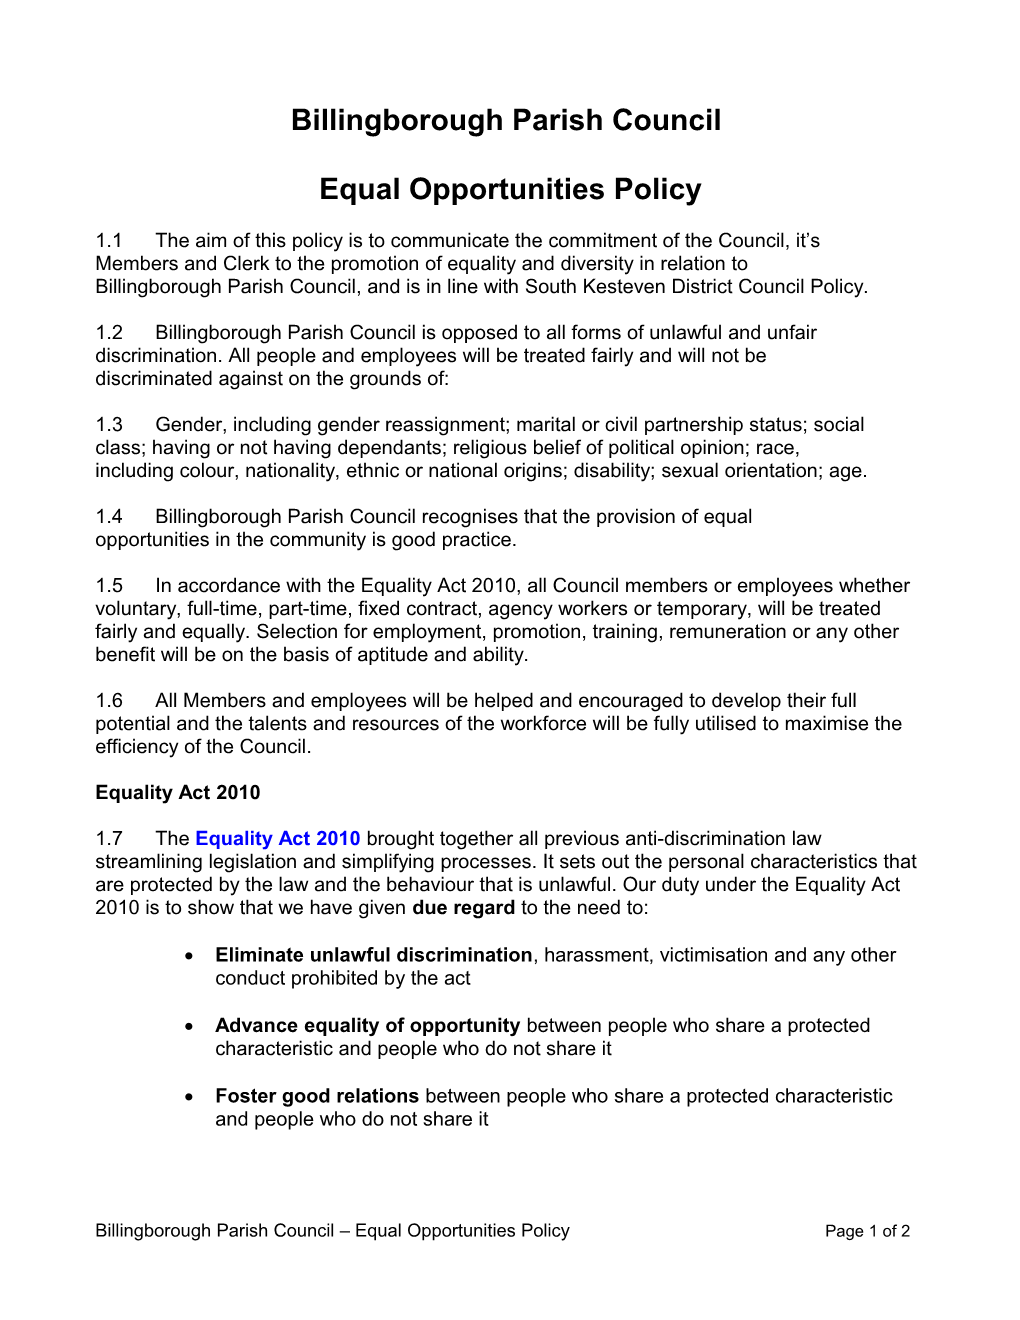 Equal Opportunities a Policy